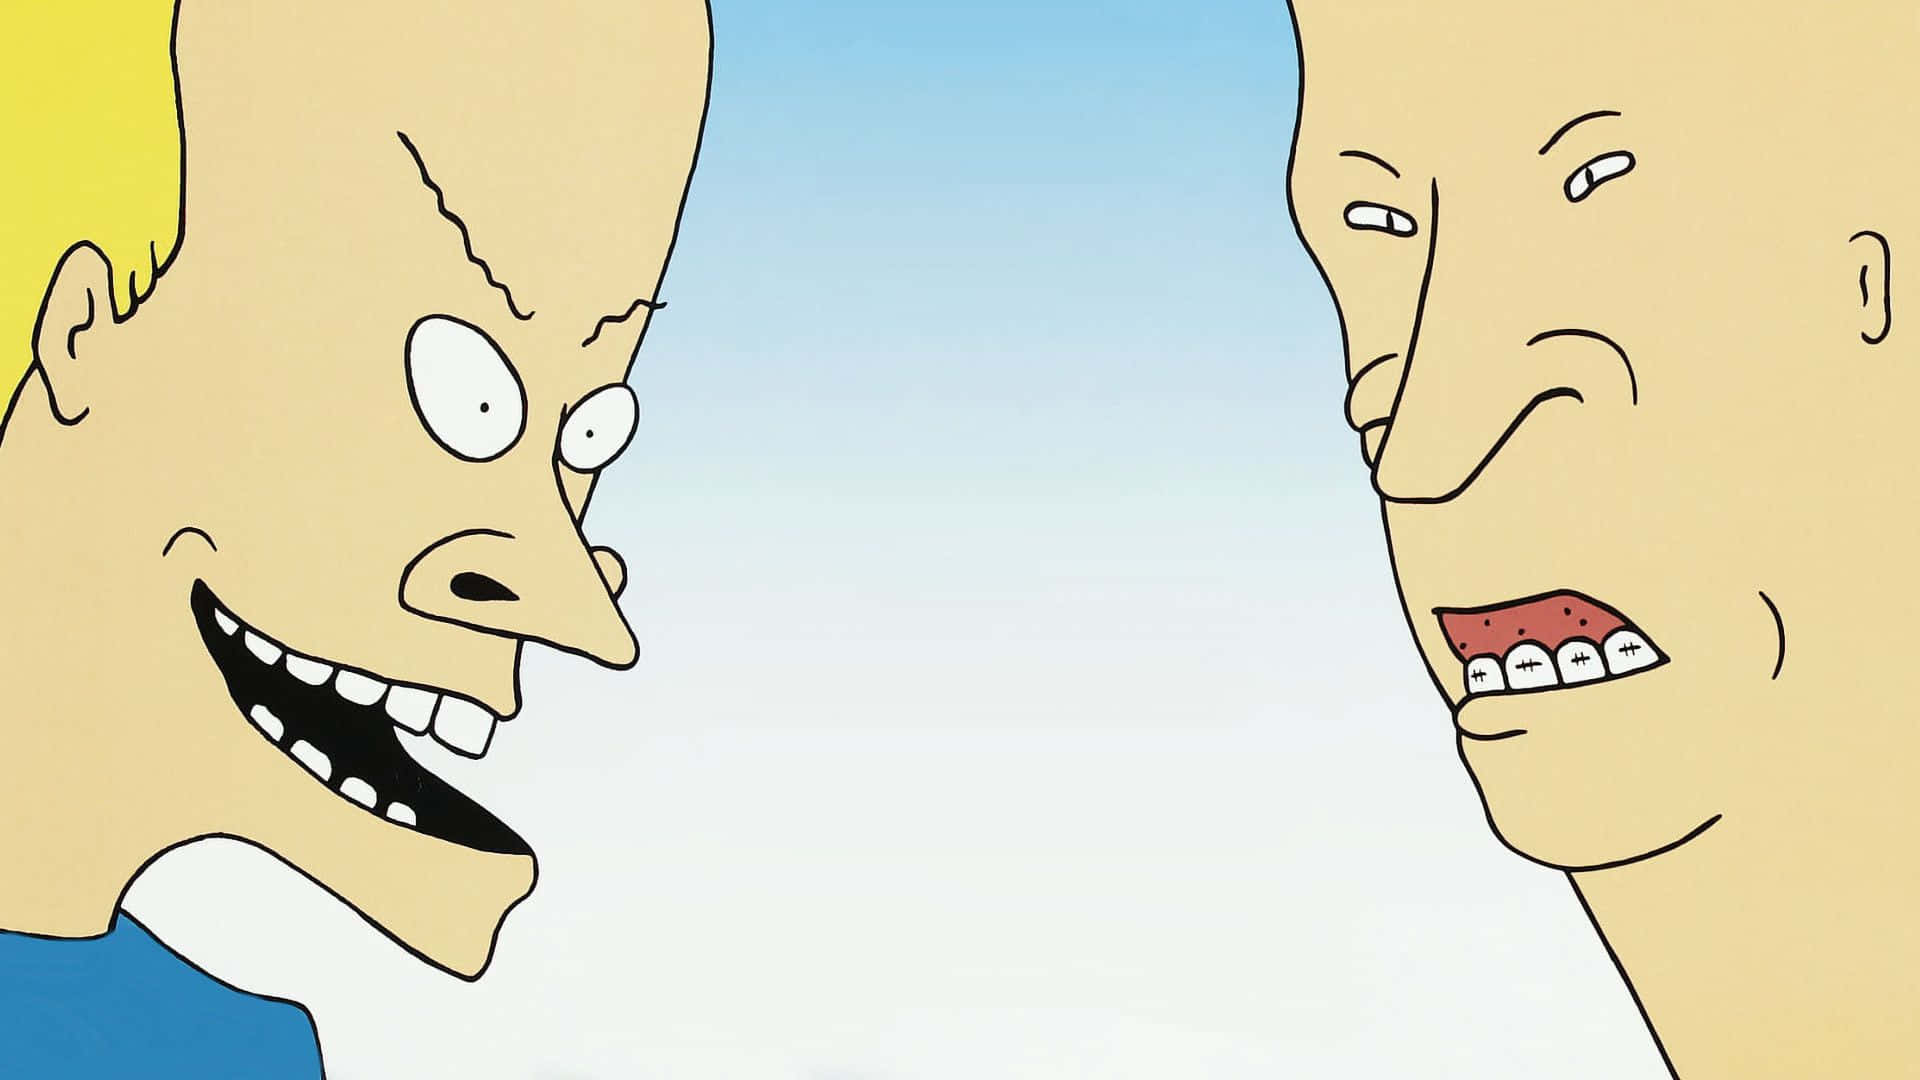 Beavis and Butthead in All their Glory